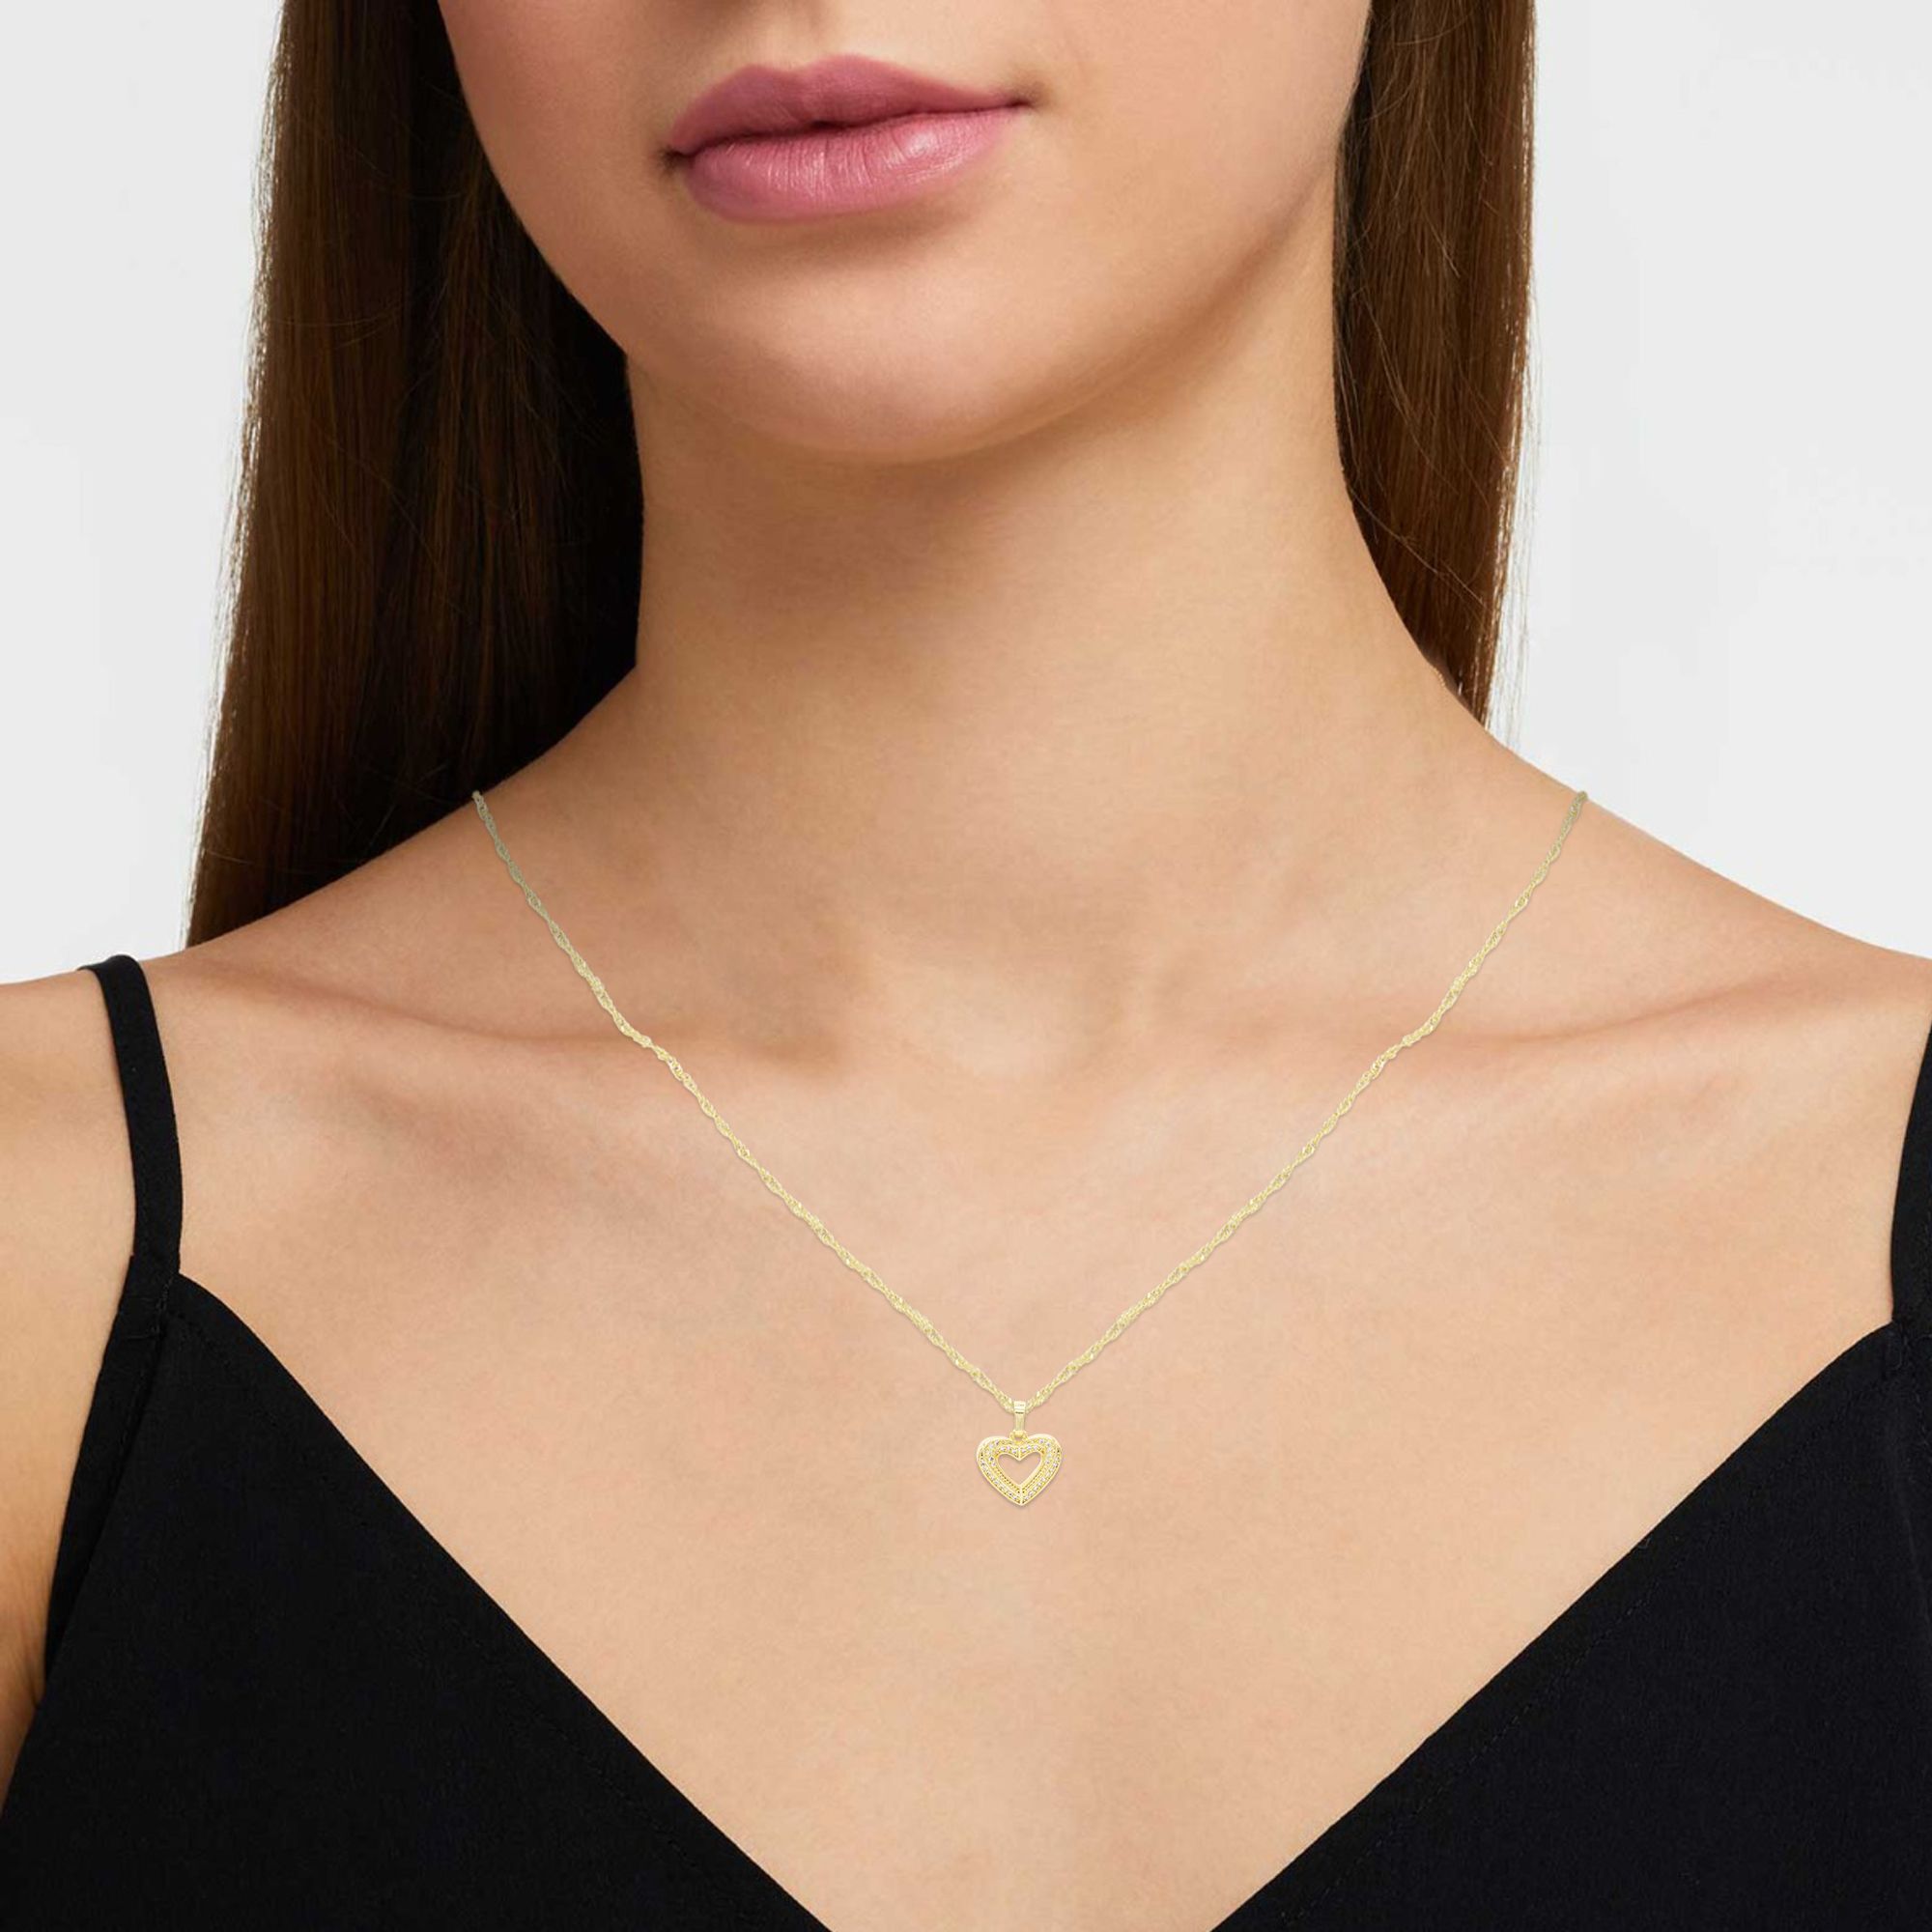 Cubic Zirconia 14K Gold Filled Double Layered Heart Pendant Necklace Set